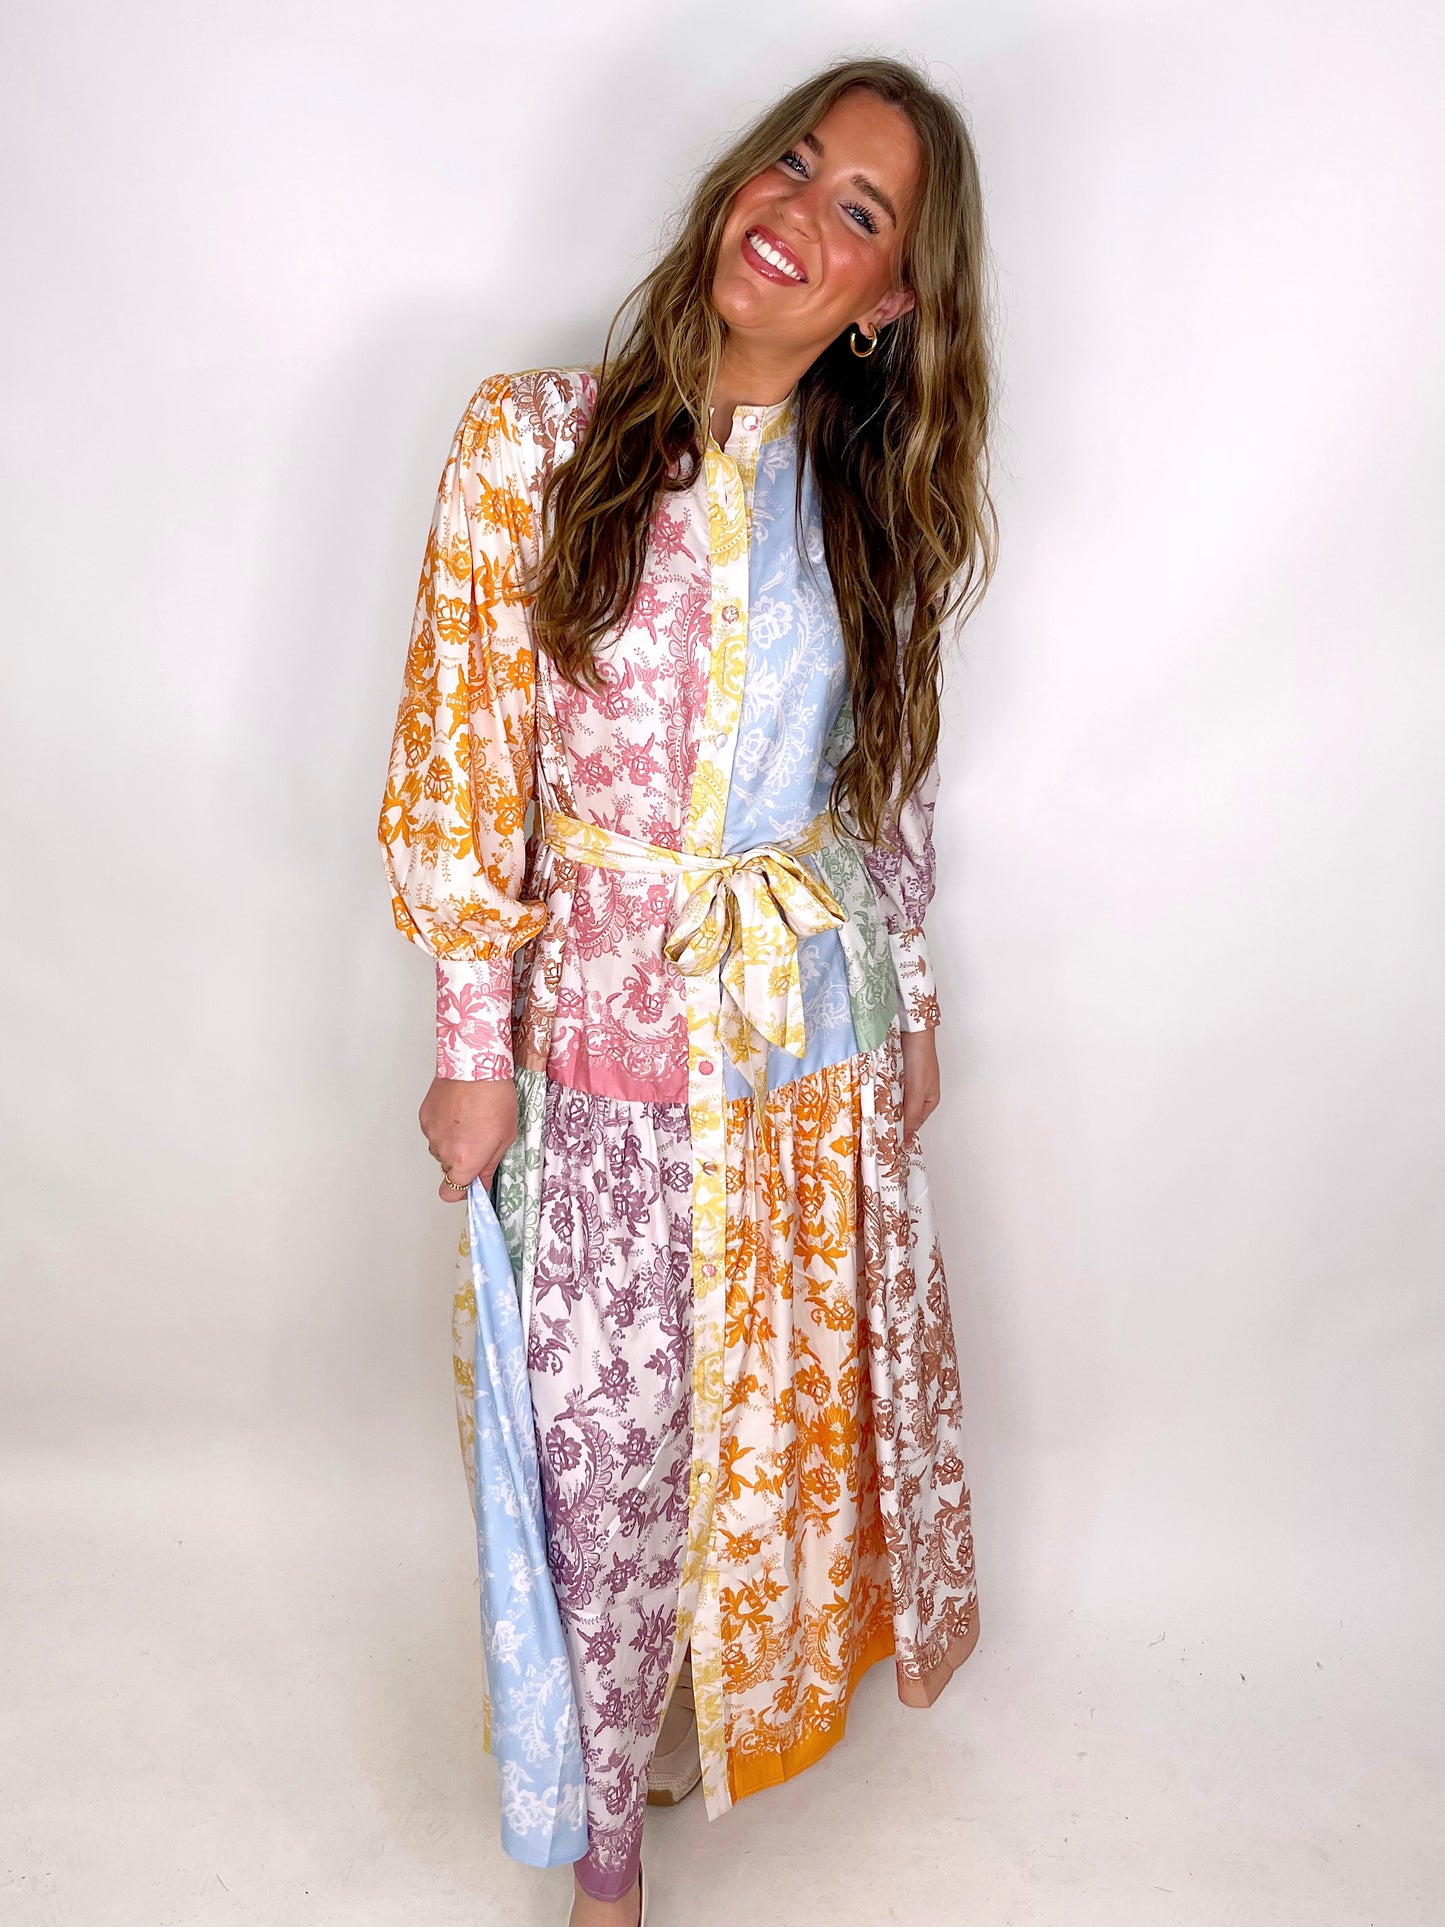 The Tucker Maxi Dress-Maxi Dress-J.nna-The Village Shoppe, Women’s Fashion Boutique, Shop Online and In Store - Located in Muscle Shoals, AL.